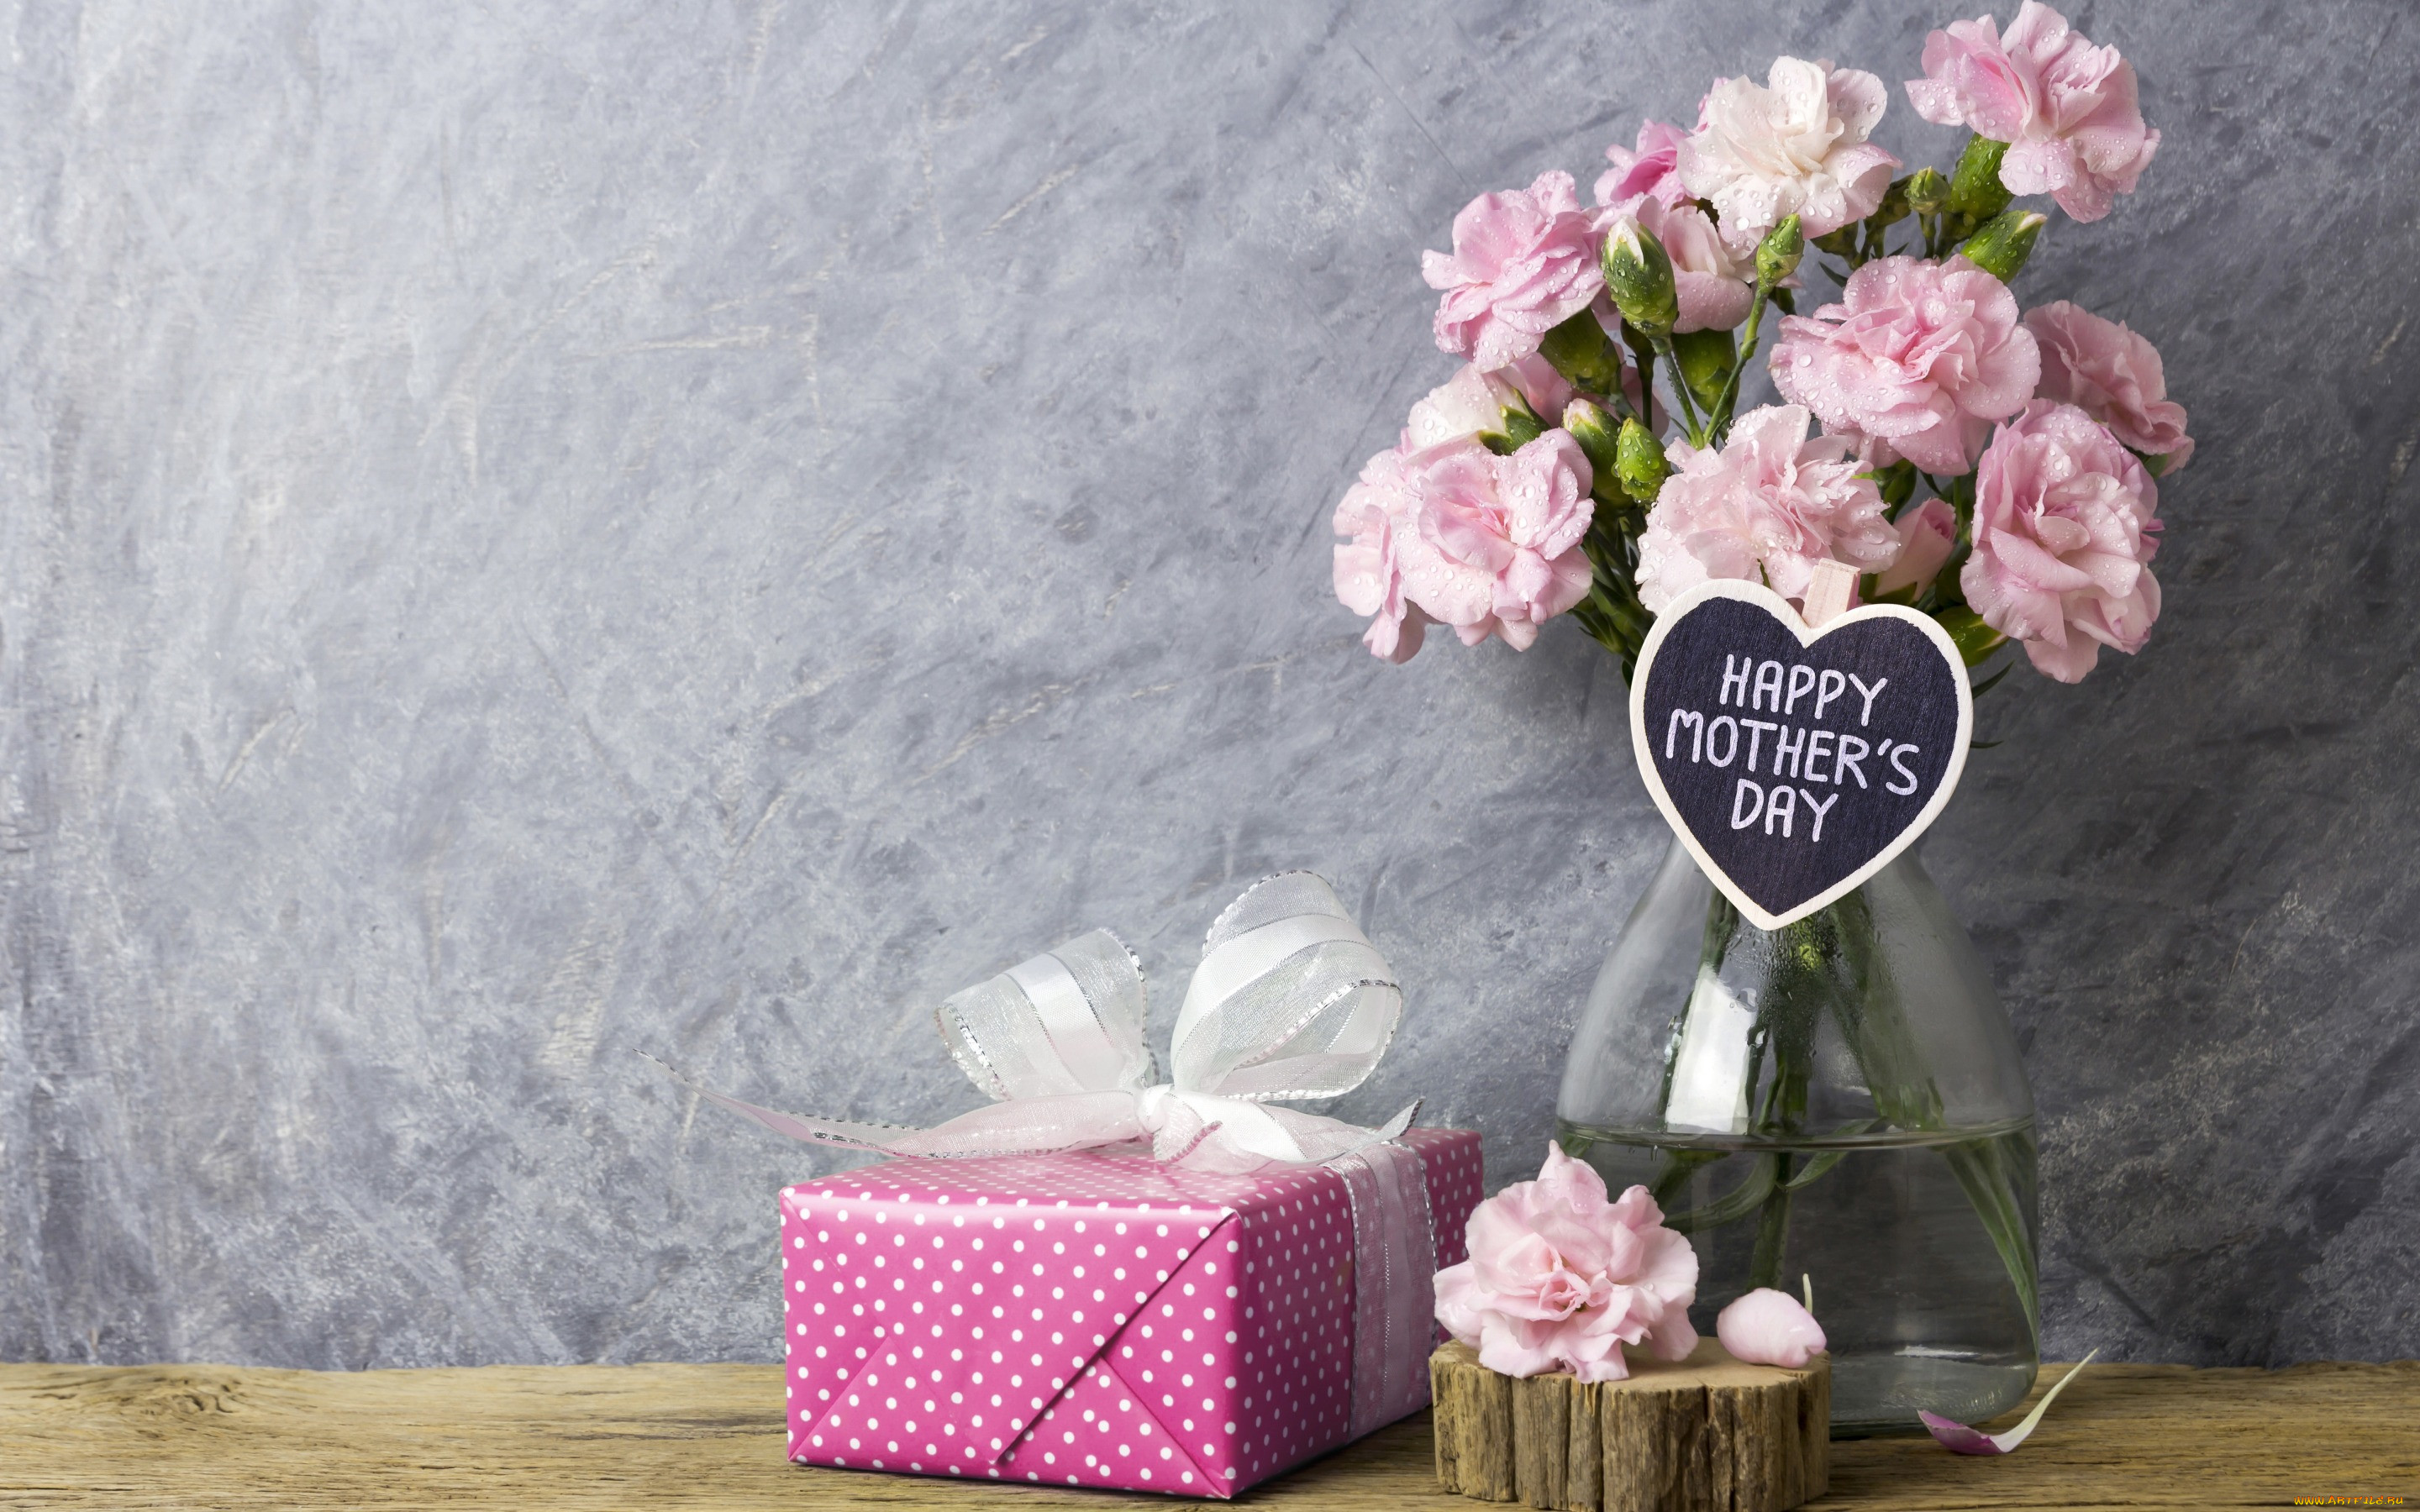 , , , , gift, happy, wood, beautiful, mother's, day, flowers, vintage, , pink, romantic